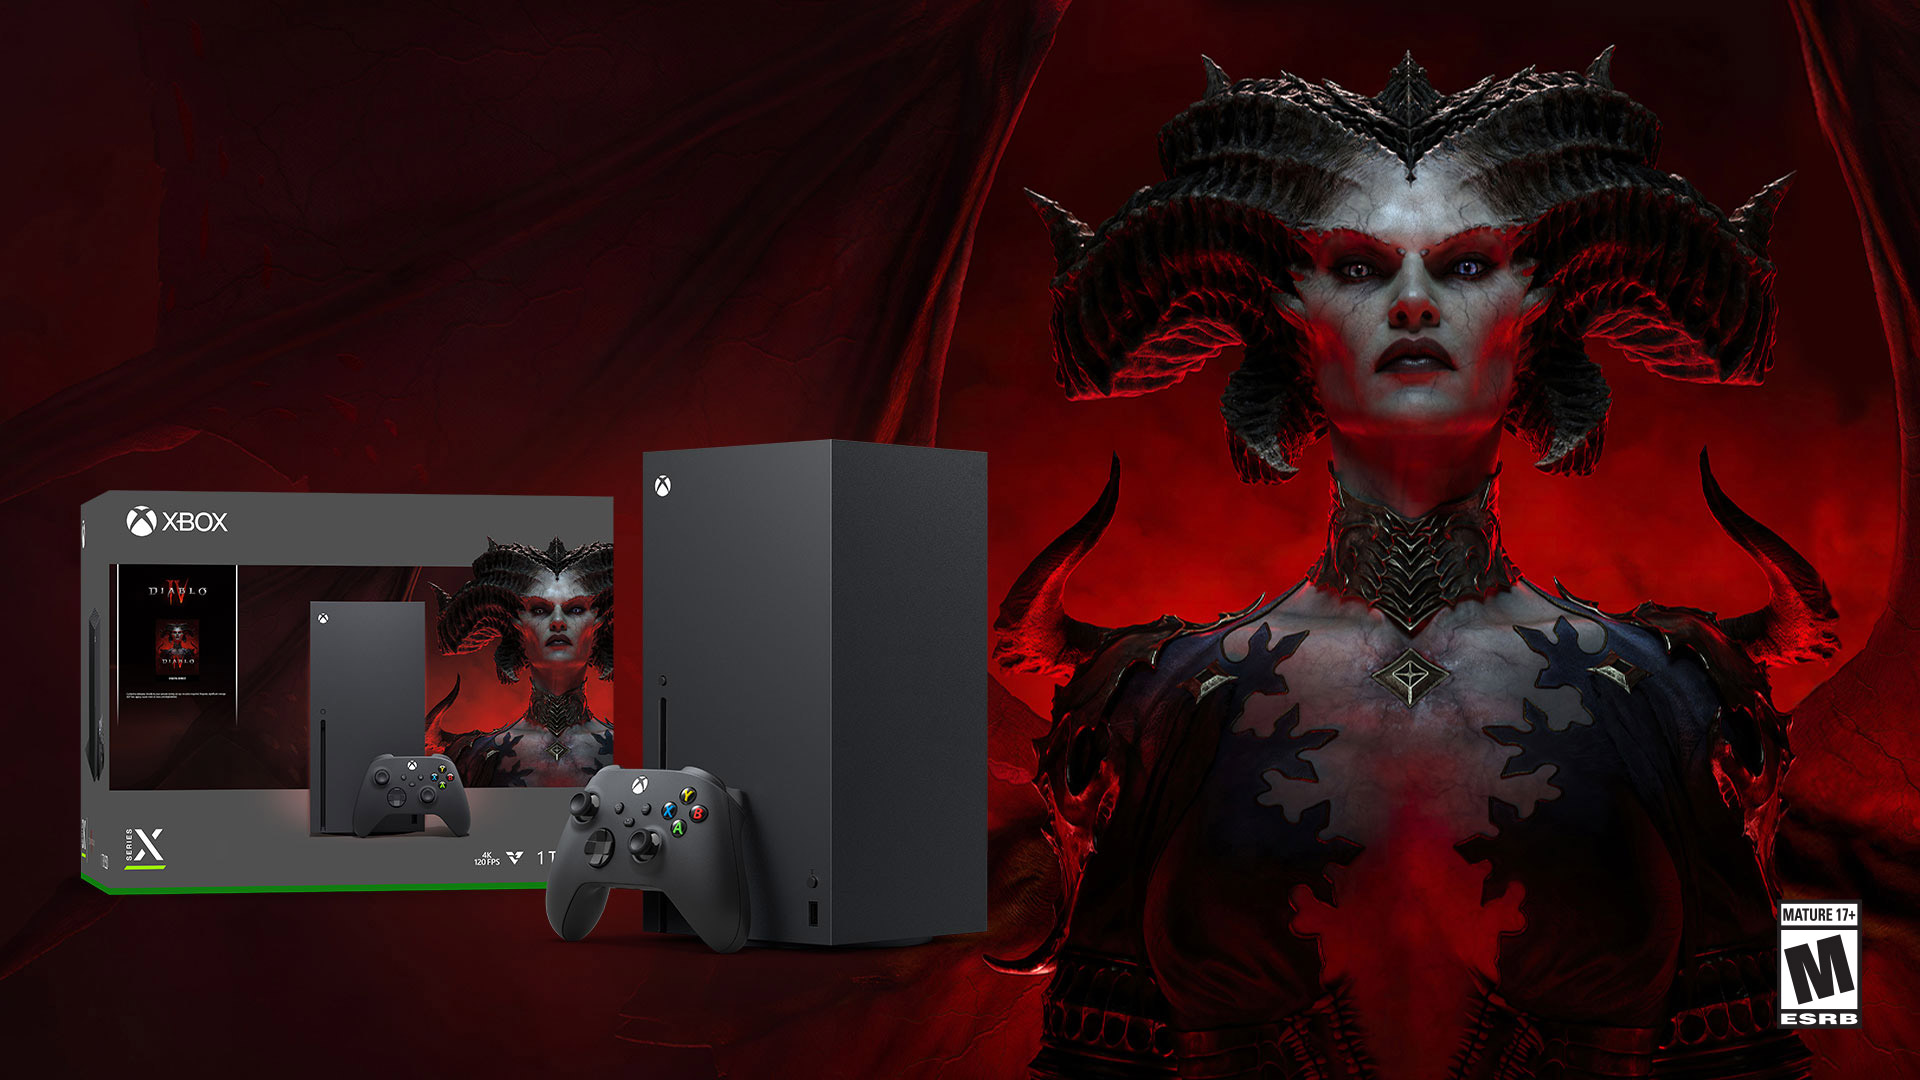 Announcing the Xbox Series X – Diablo IV Bundle, includes Diablo IV and Light-Bearer Mount with Caparison of Faith Mount Armor. Pre-order at participating retailers worldwide starting today.